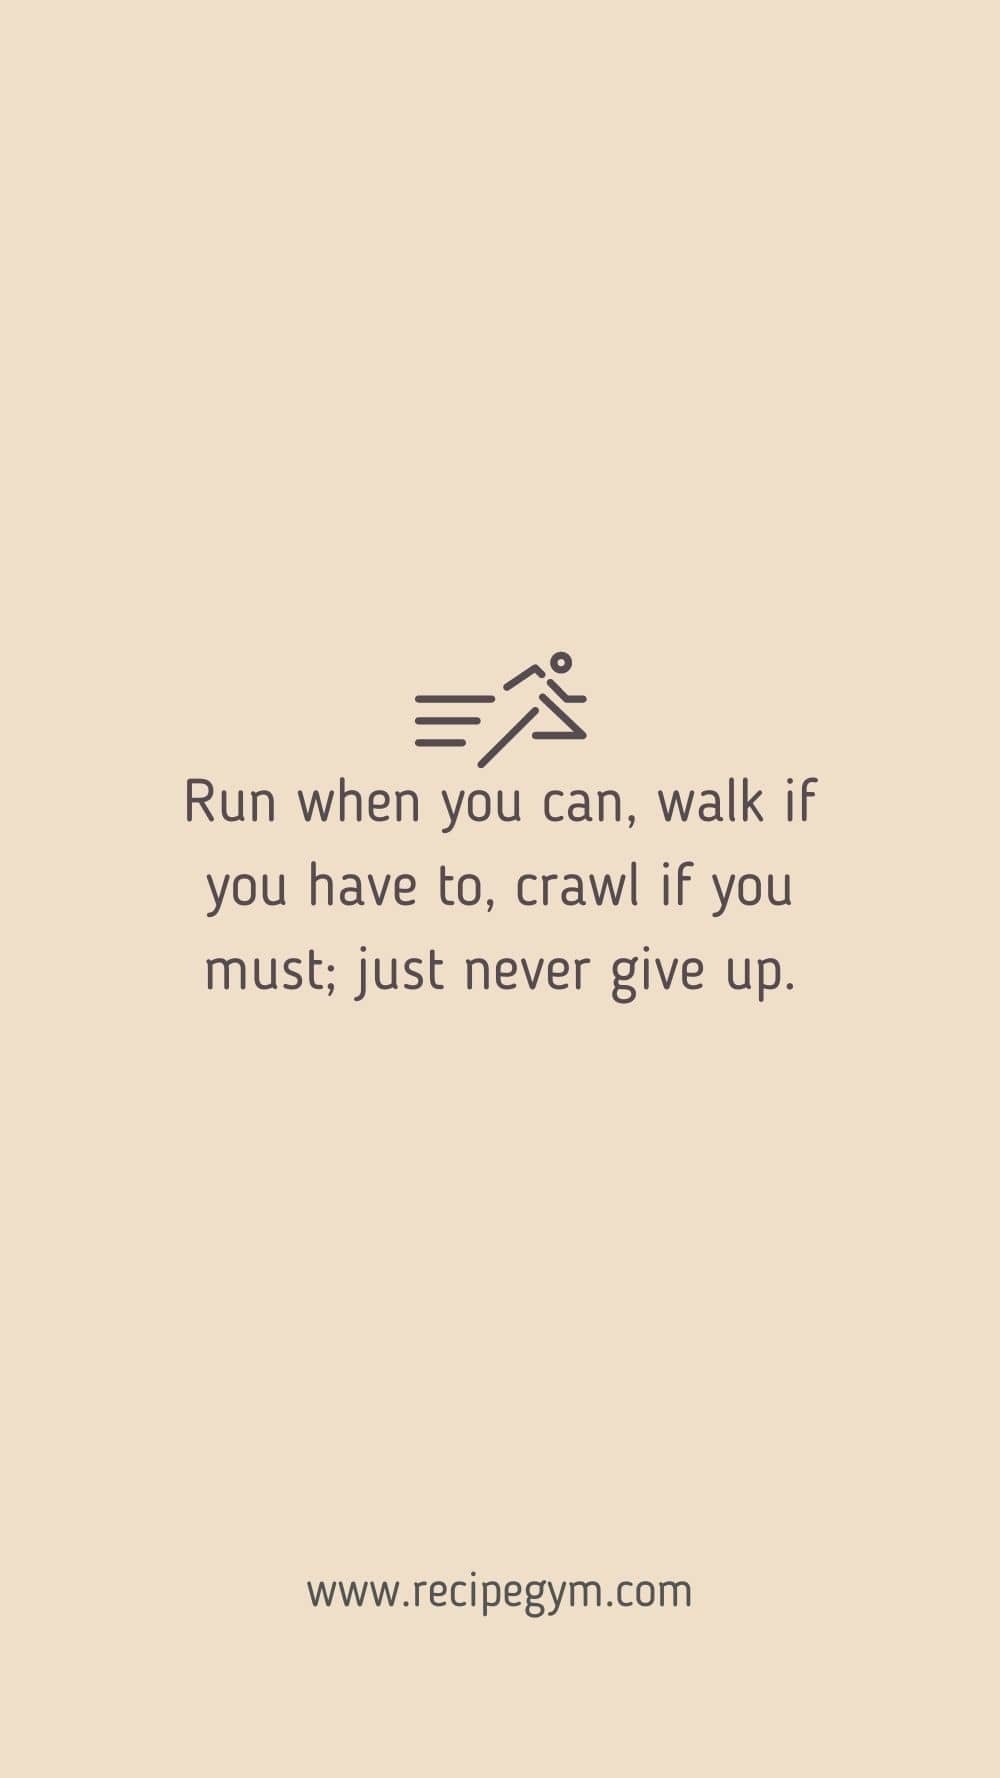 Run when you can walk if you have to crawl if you must just never give up